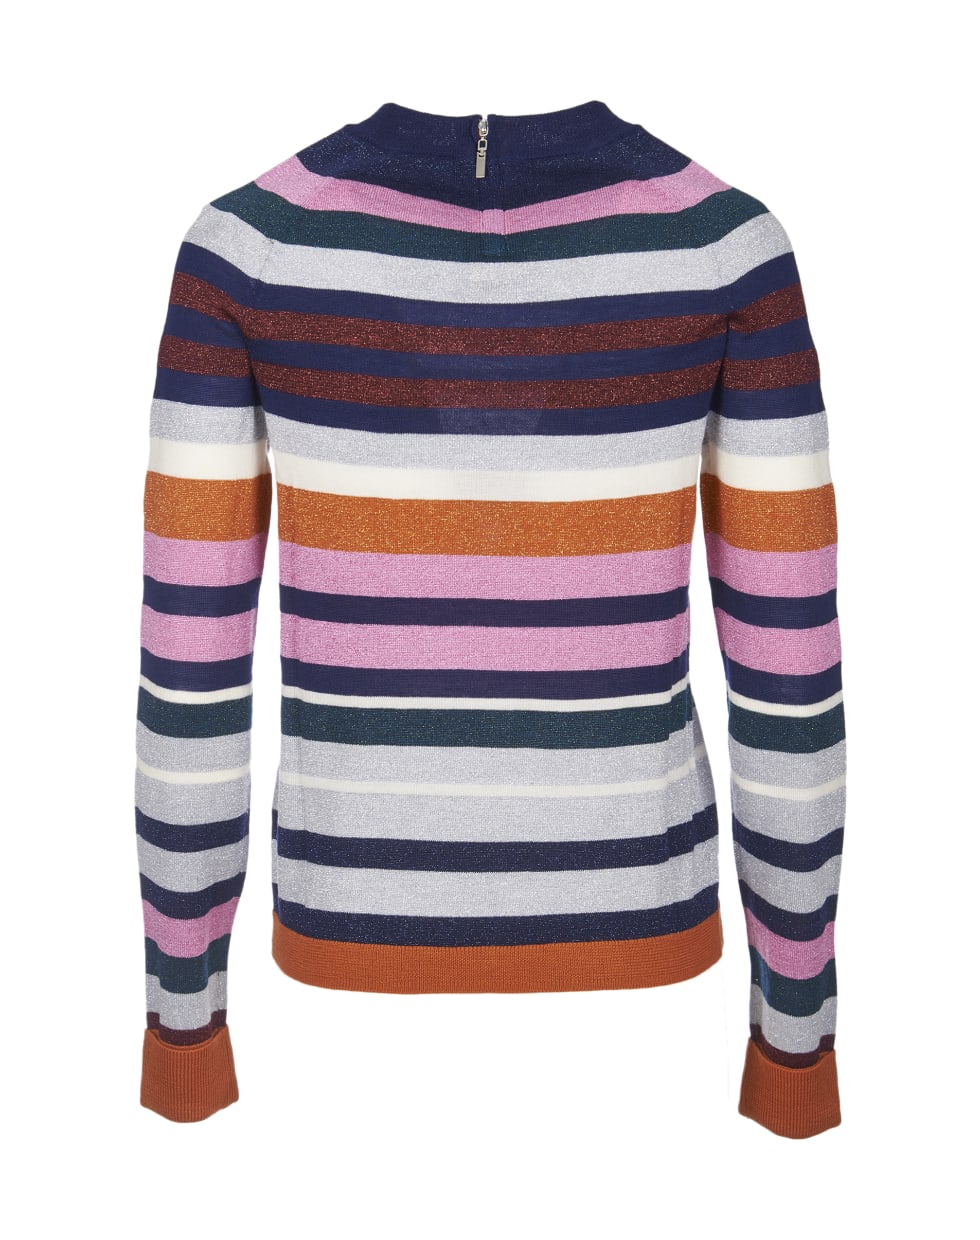 PS by Paul Smith Sweater - Bordeaux